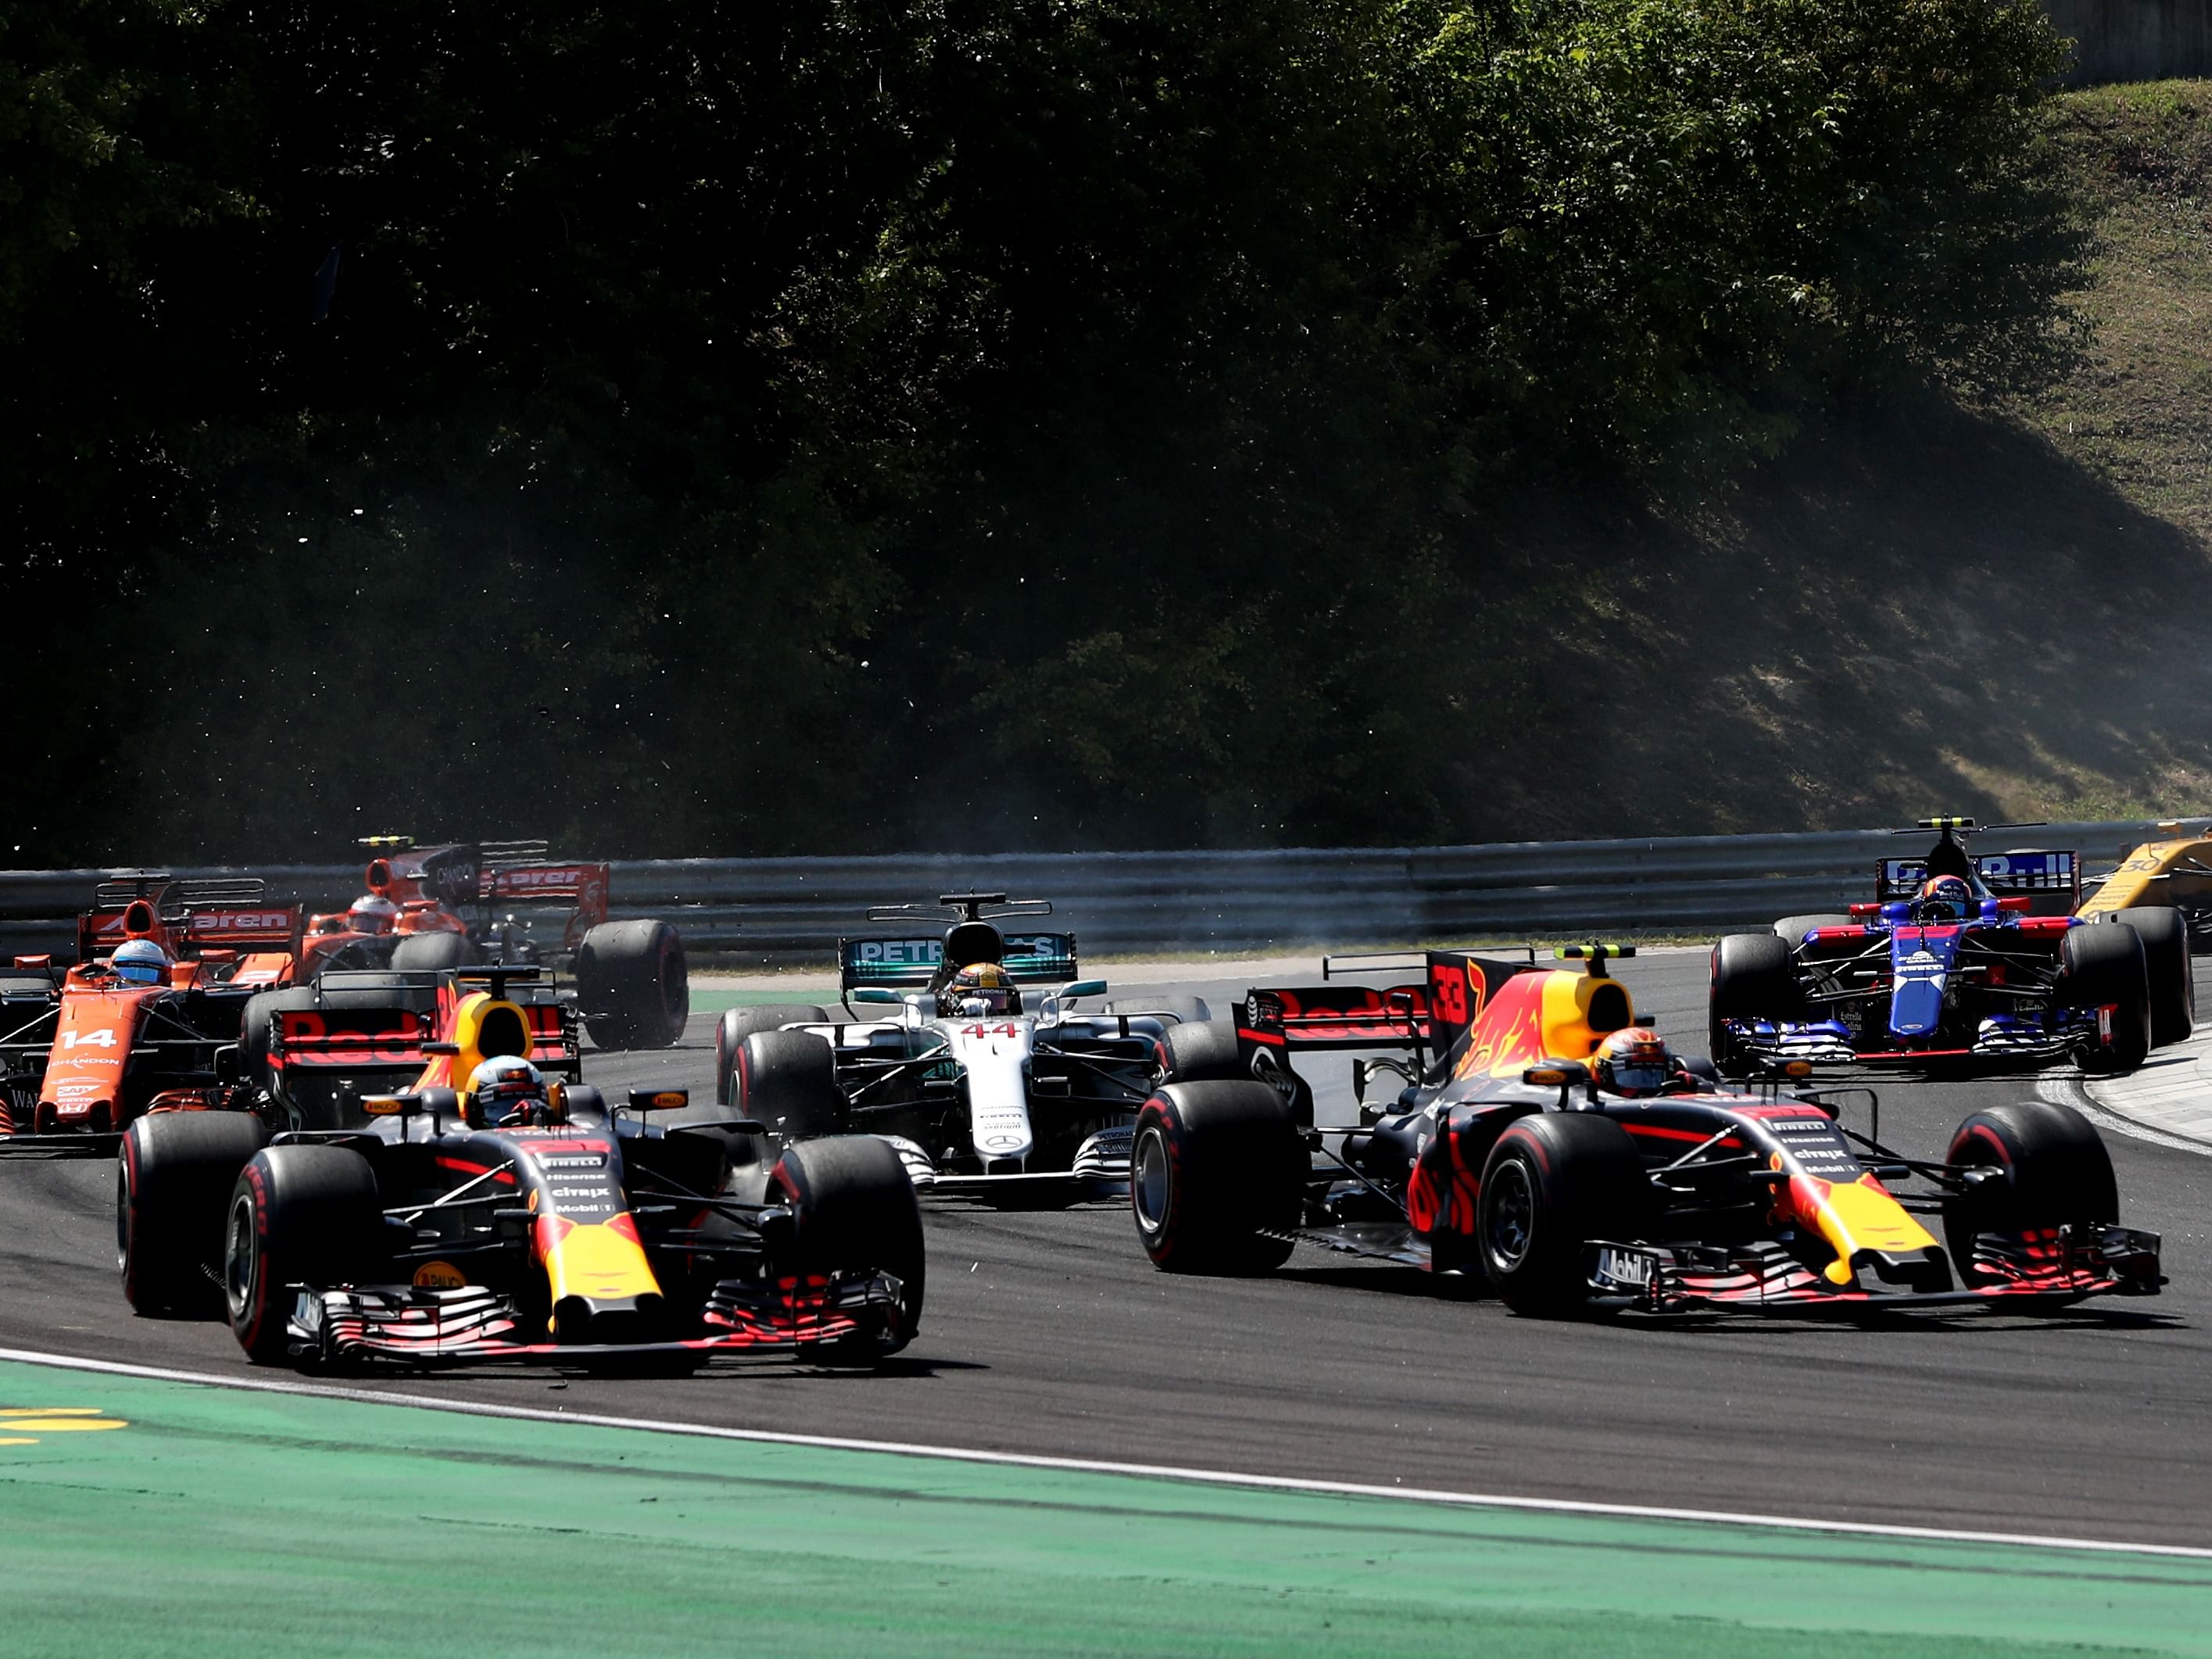 Daniel Ricciardo (3) and Max Verstappen (33) round the second corner during the 2017 F1 Hungarian Grand Prix. (Photo by Will Taylor-Medhurst/Getty Images)